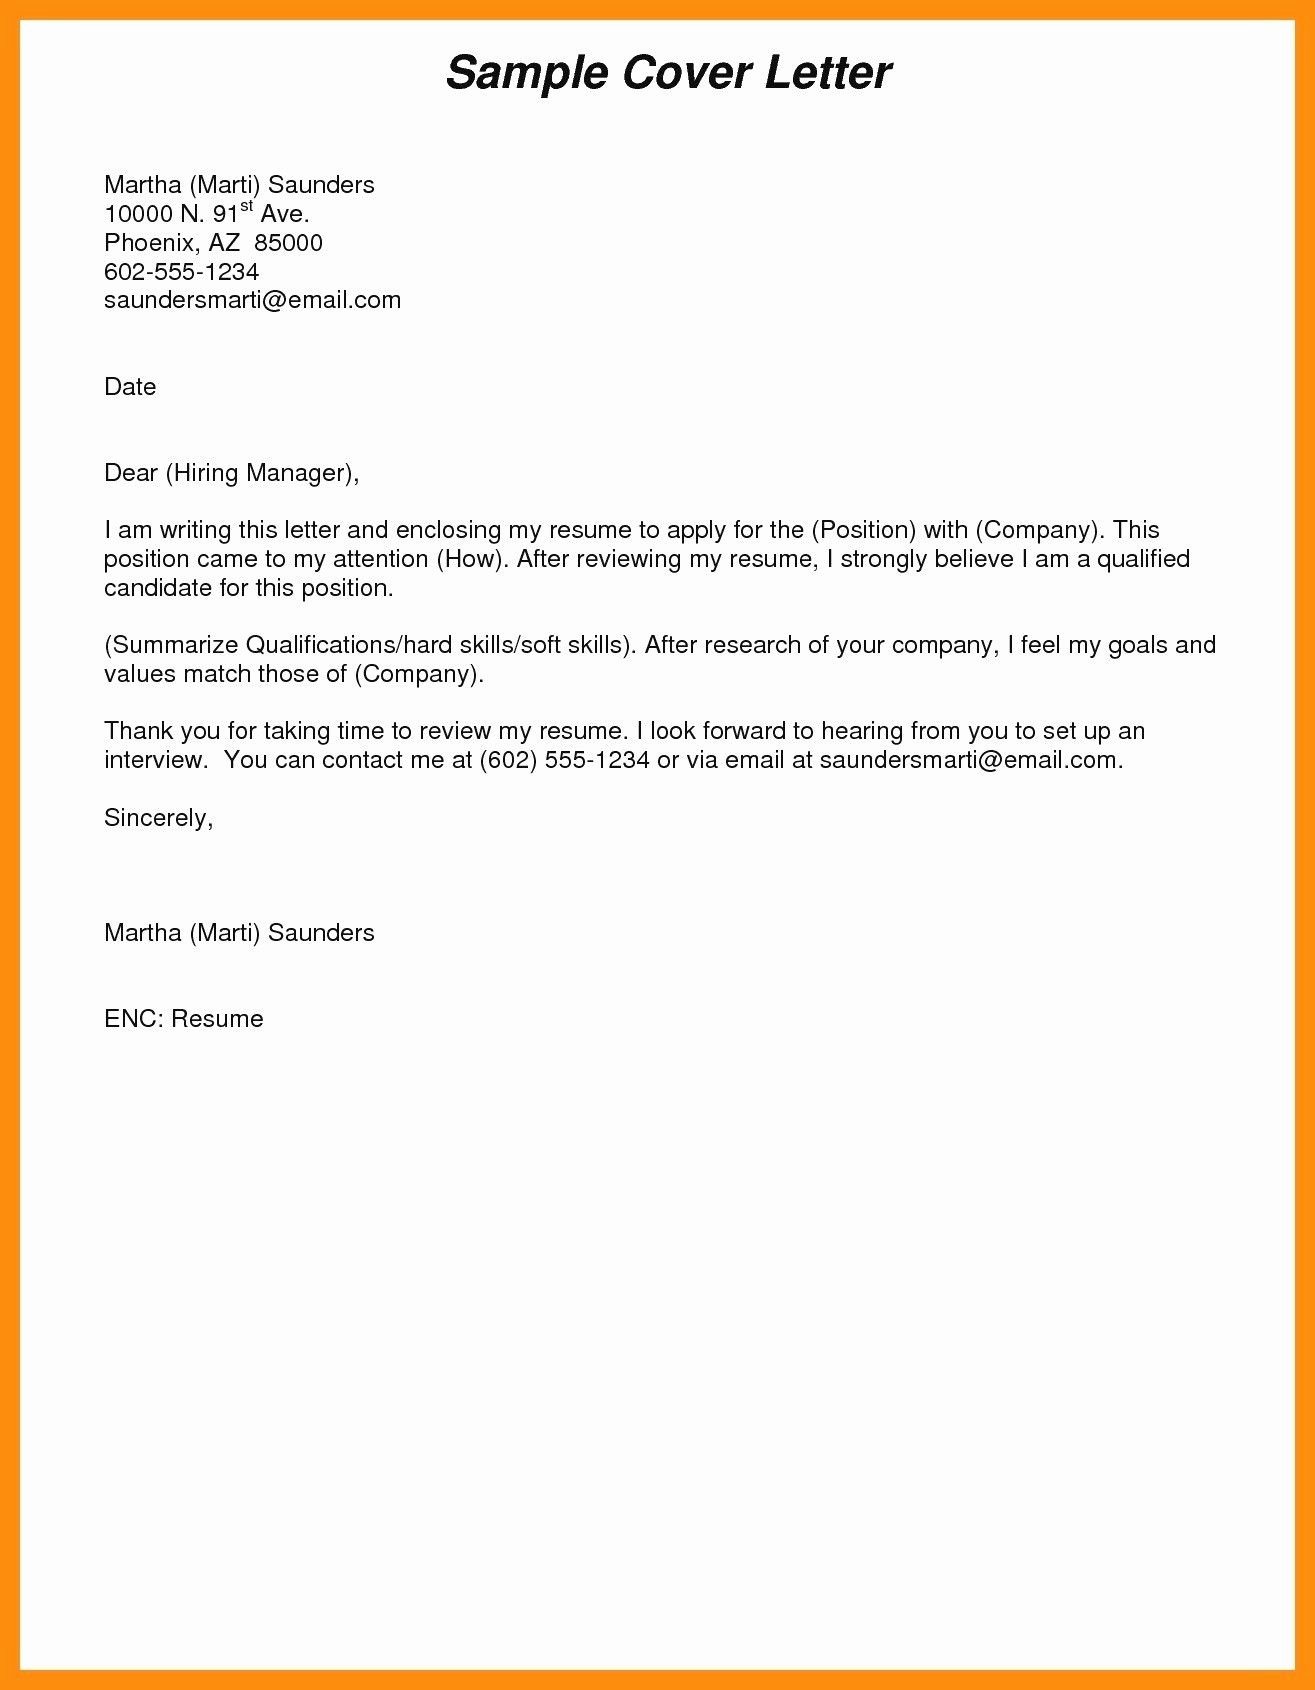 Email Cover Letter Template Elegant 25 Email Cover Letter